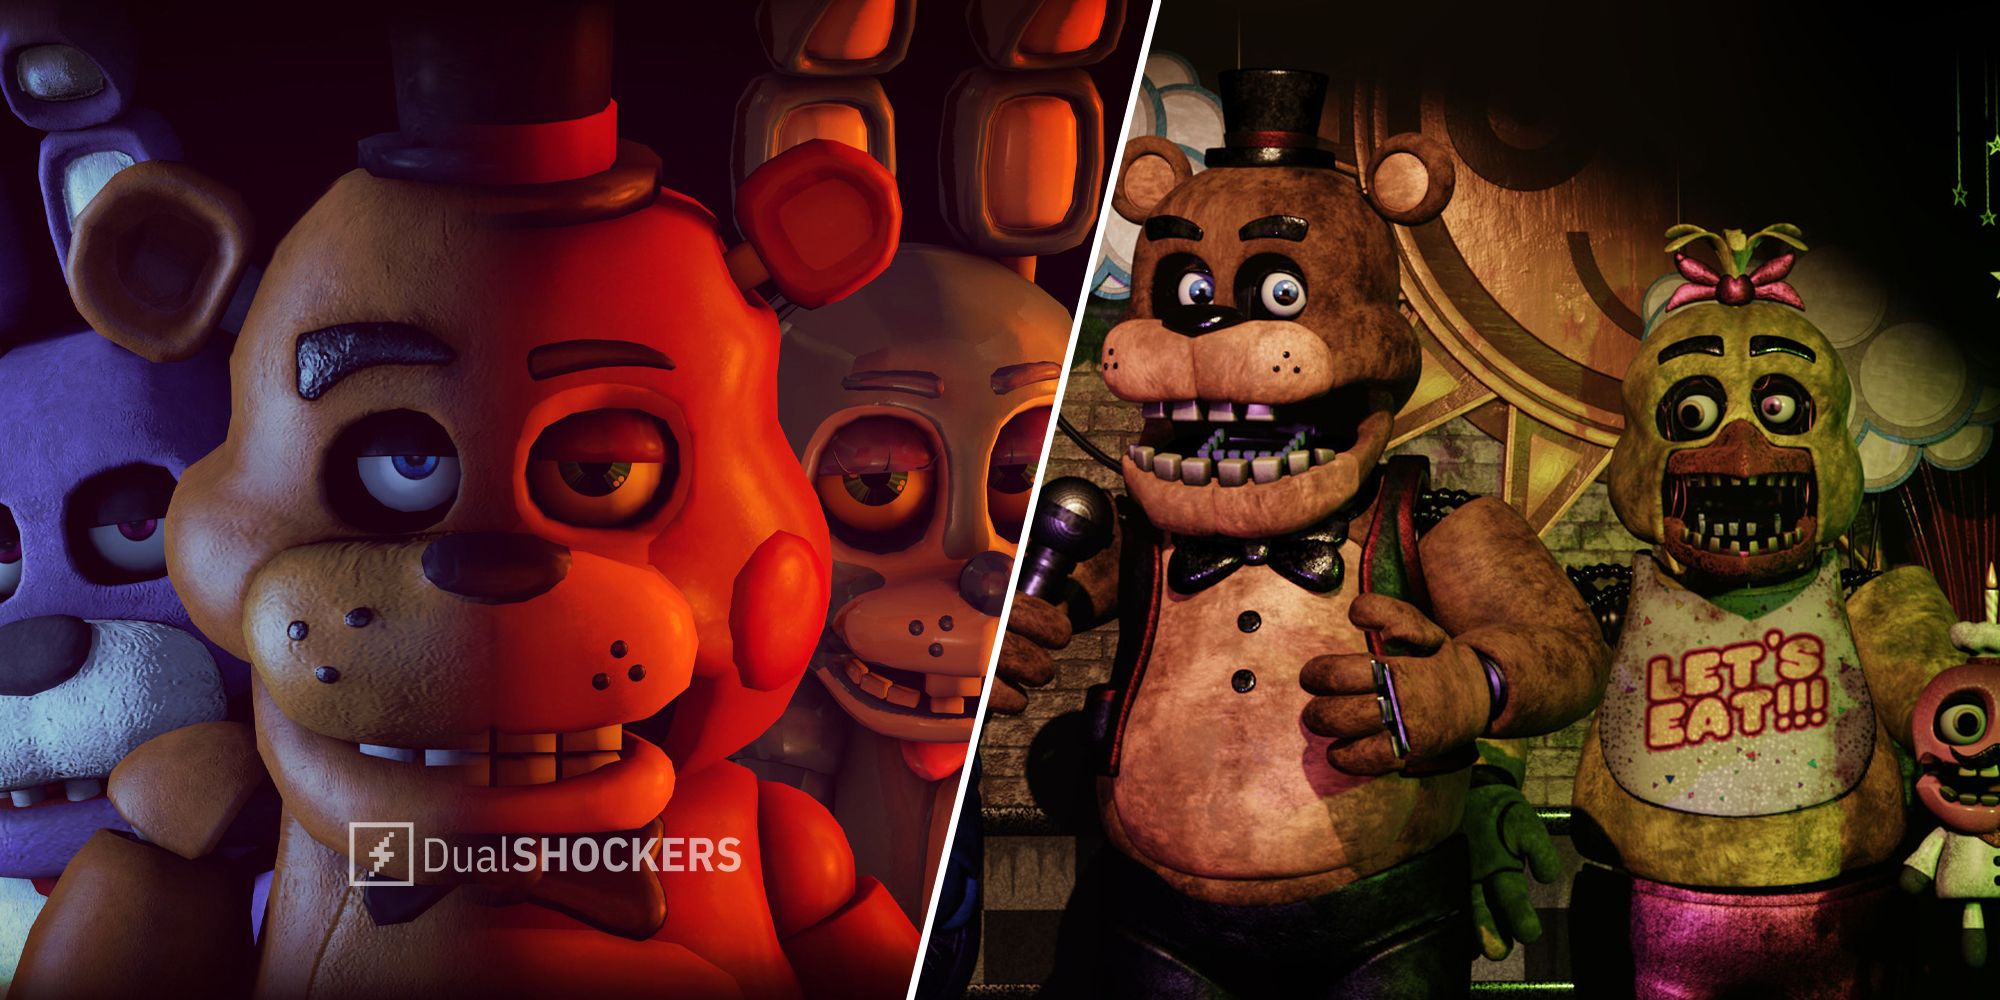 The Five Nights At Freddy's gameplay and characters